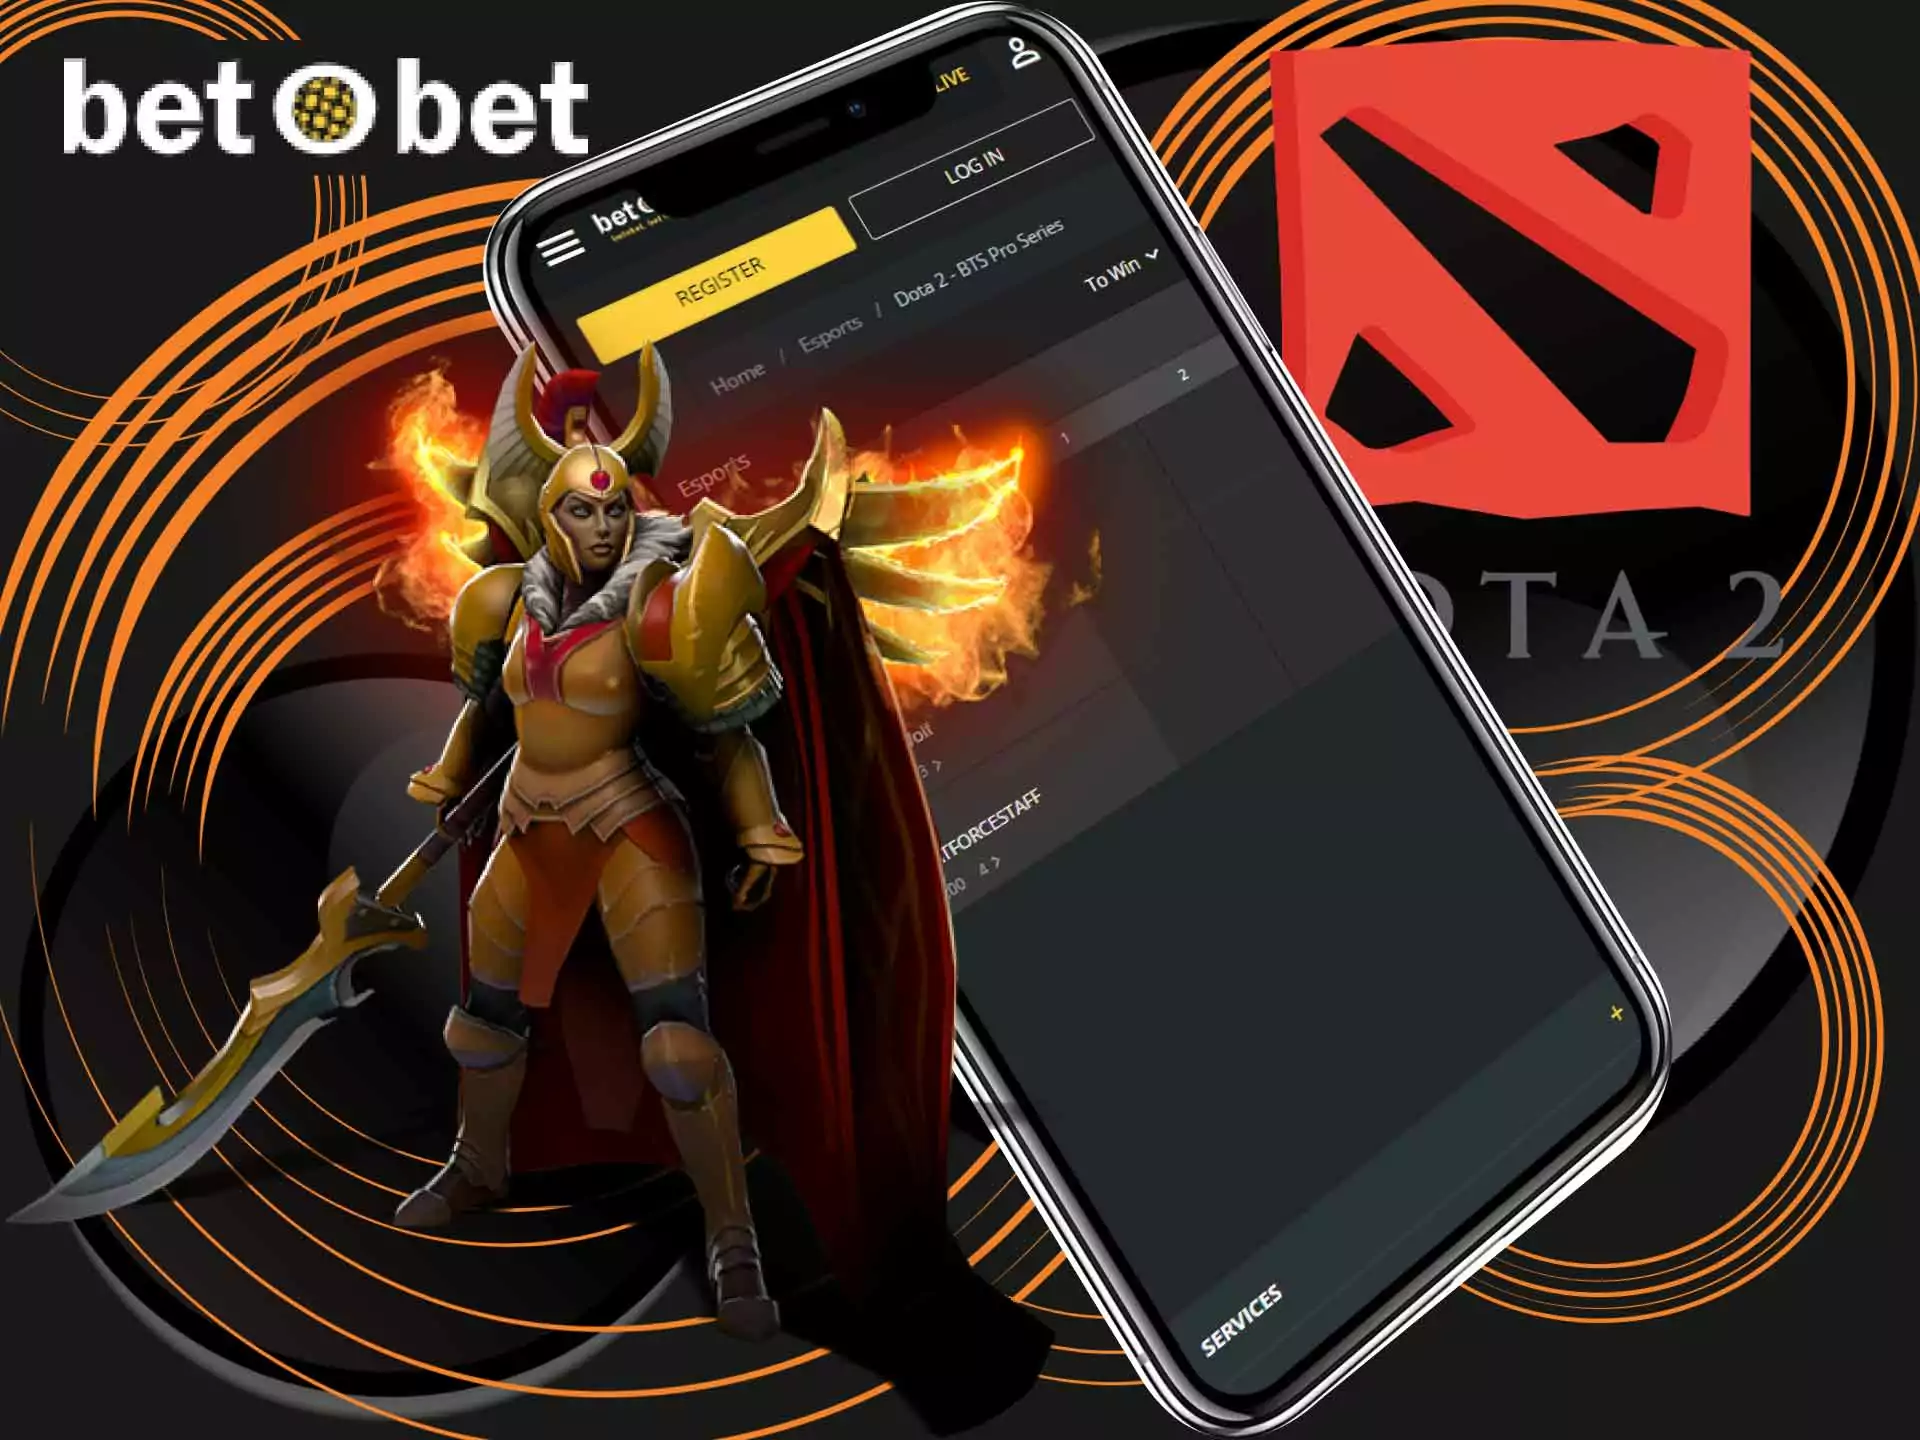 Bet on DOTA 2 events in the BetOBet sportsbook.